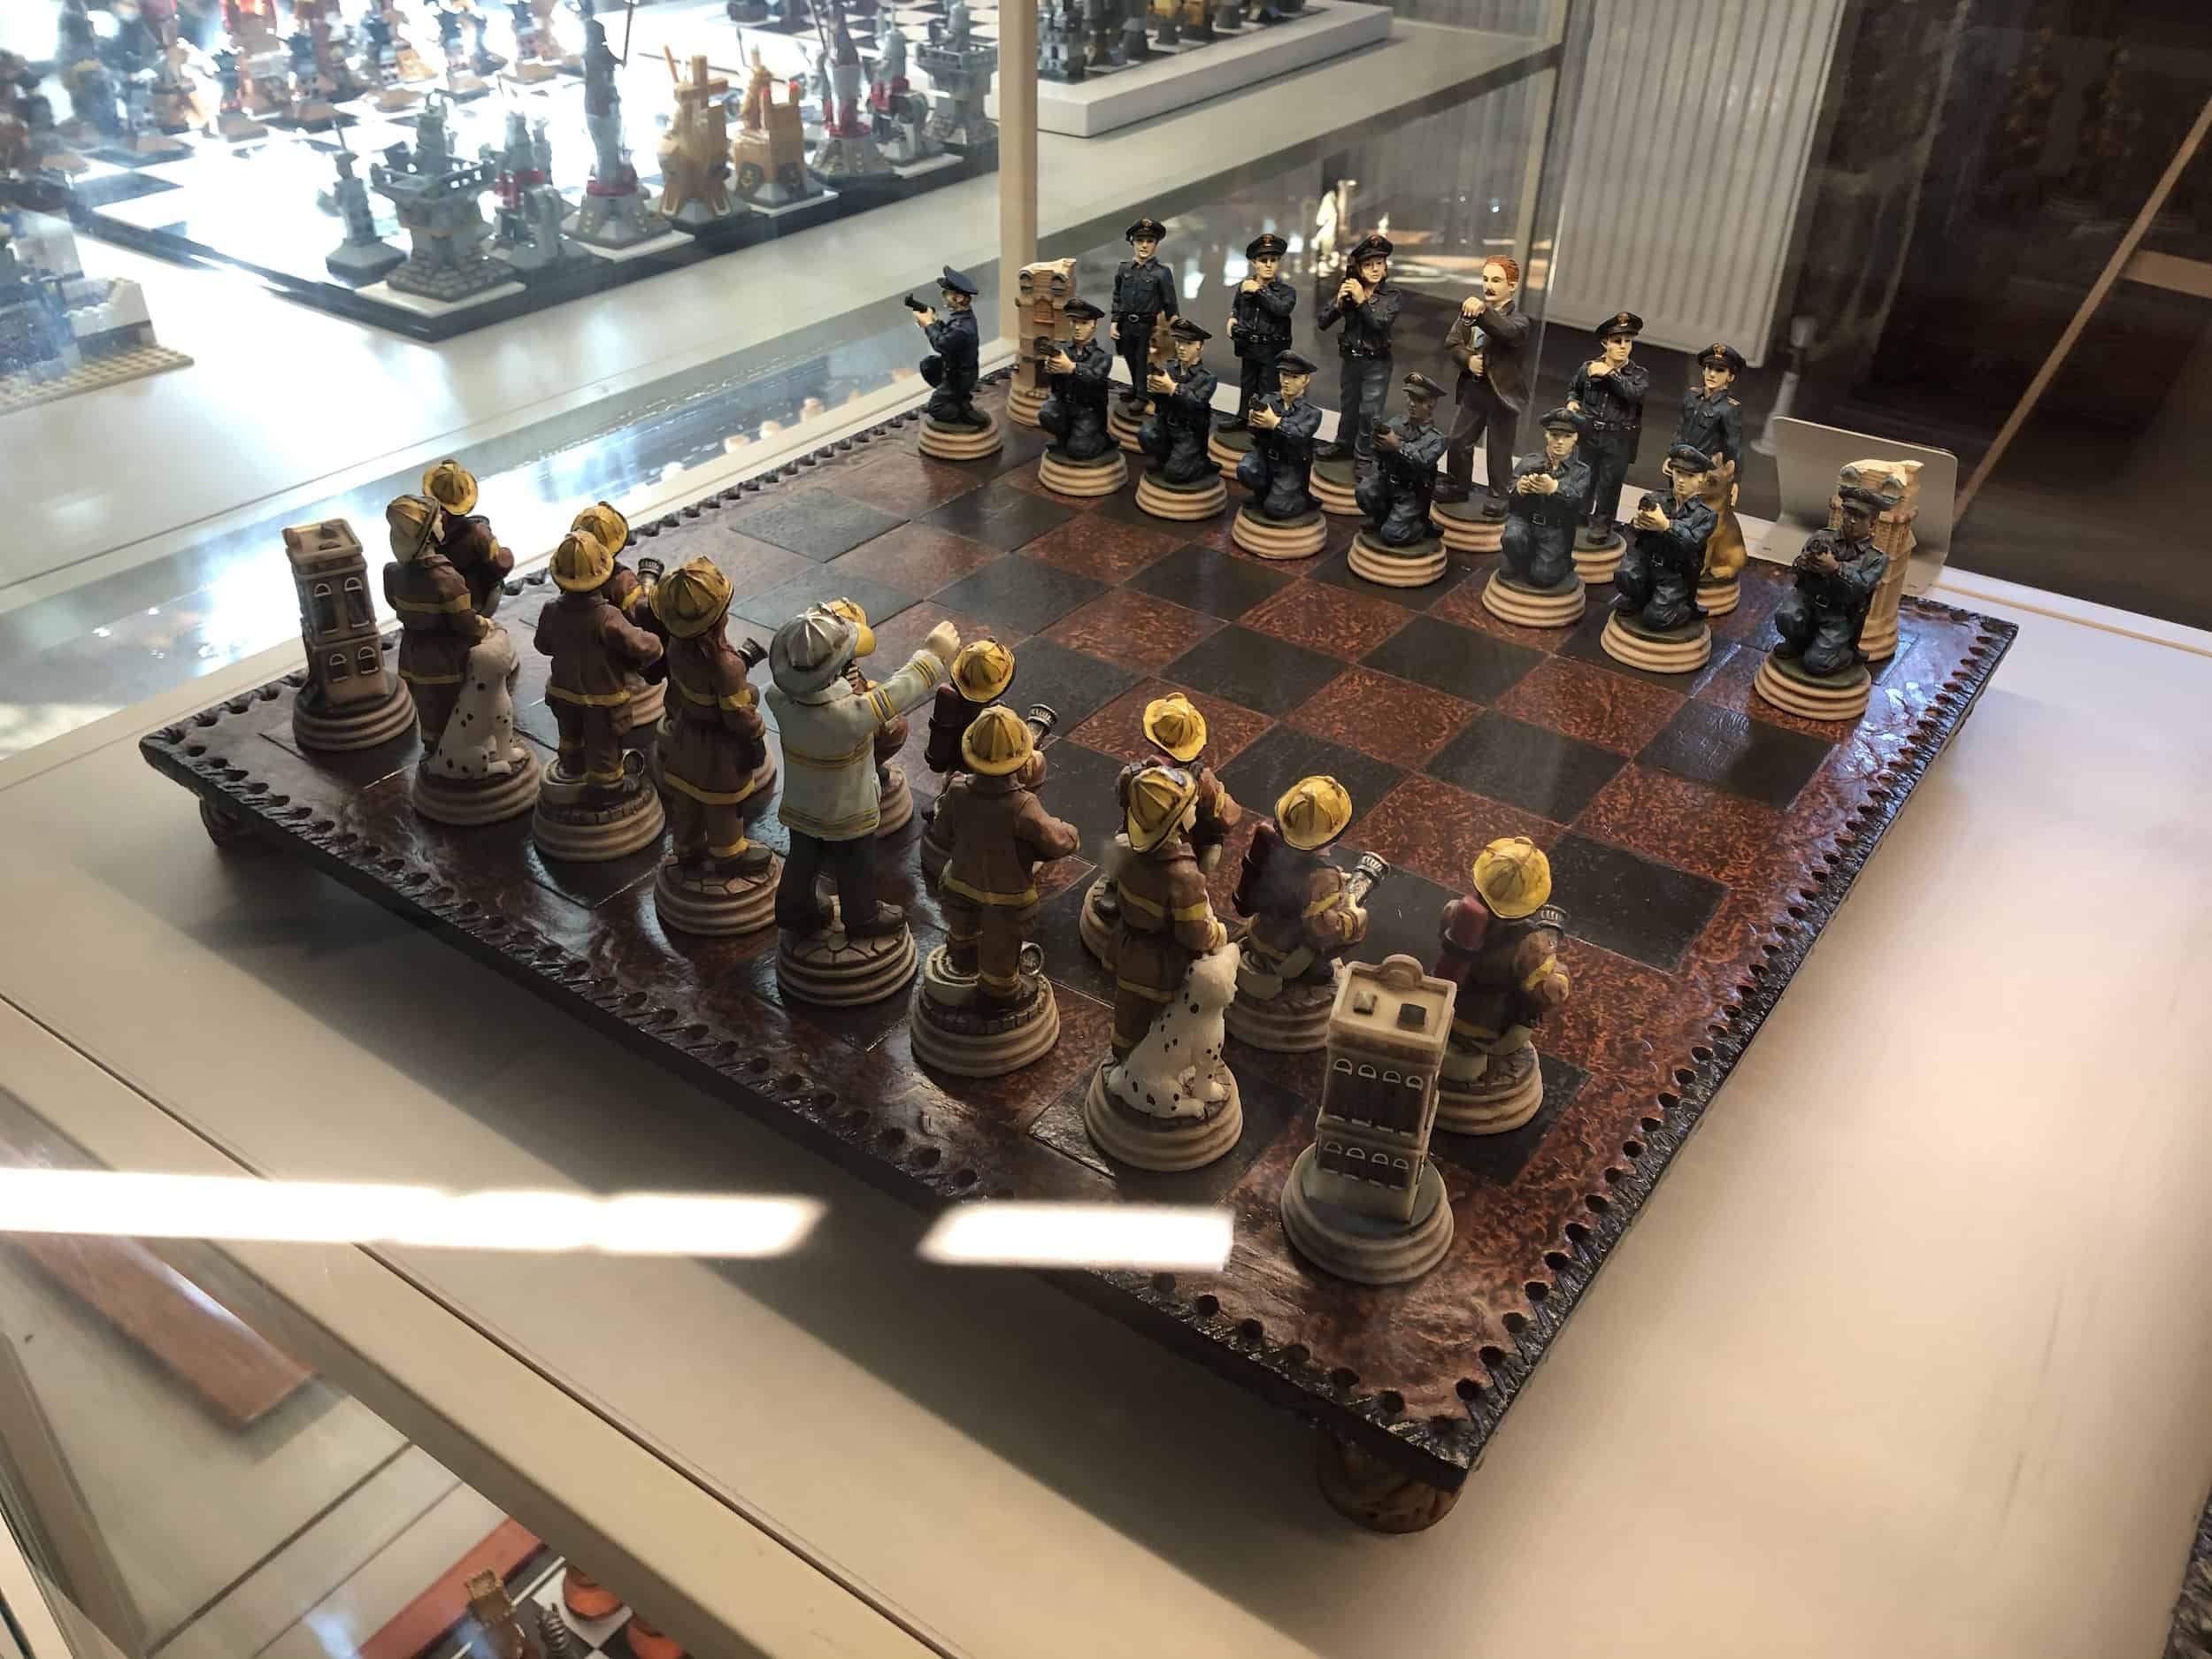 Police vs firefighters chess set